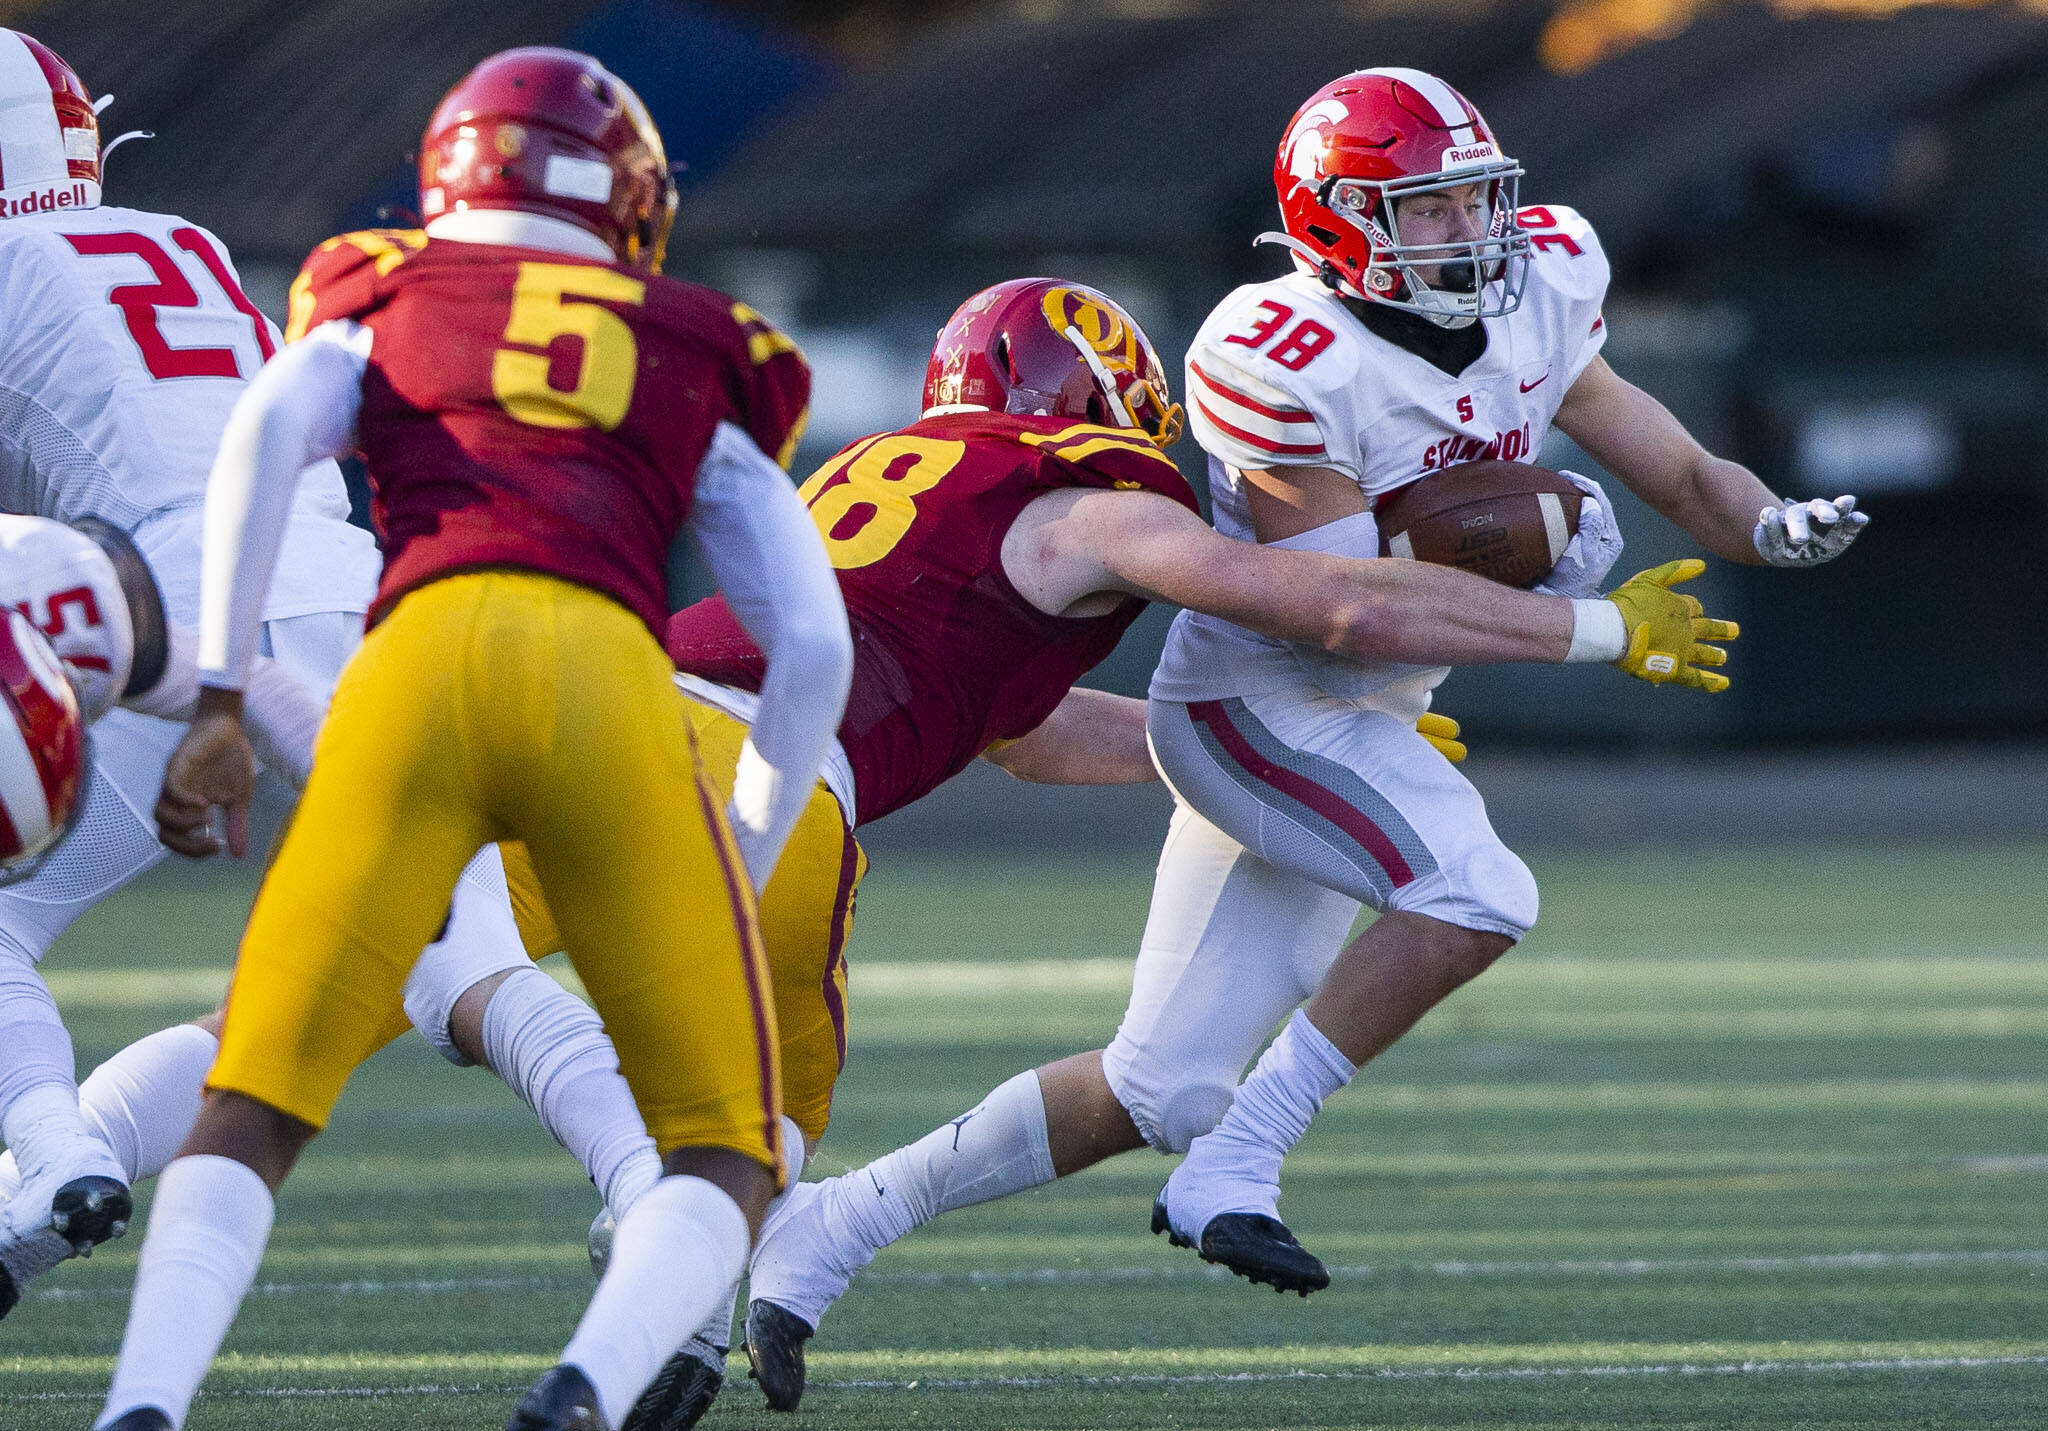 Stanwood’s Carson Beckt is tackled while running the ball during the 3A quarterfinal game against Odea on Saturday, Nov. 19, 2022 in Seattle, Washington. (Olivia Vanni / The Herald)